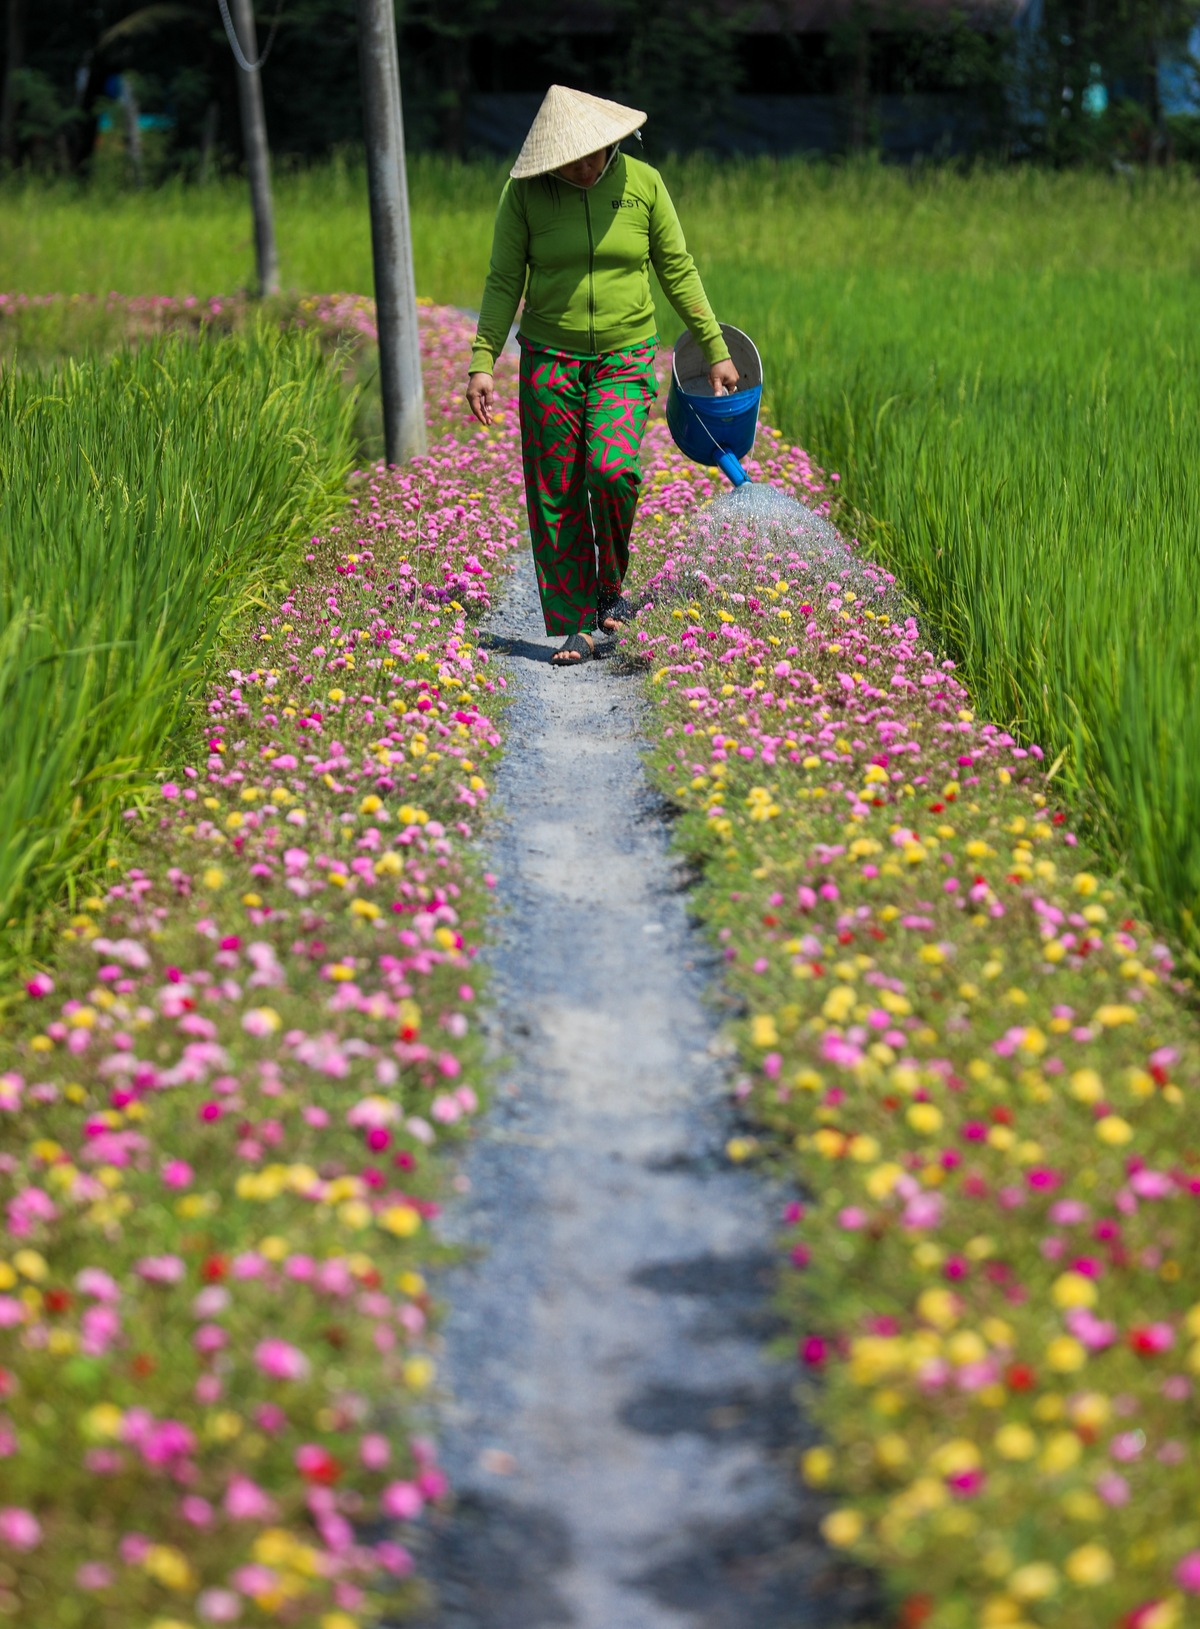 breathtaking sight of moss rose flower road in the outskirts of saigon